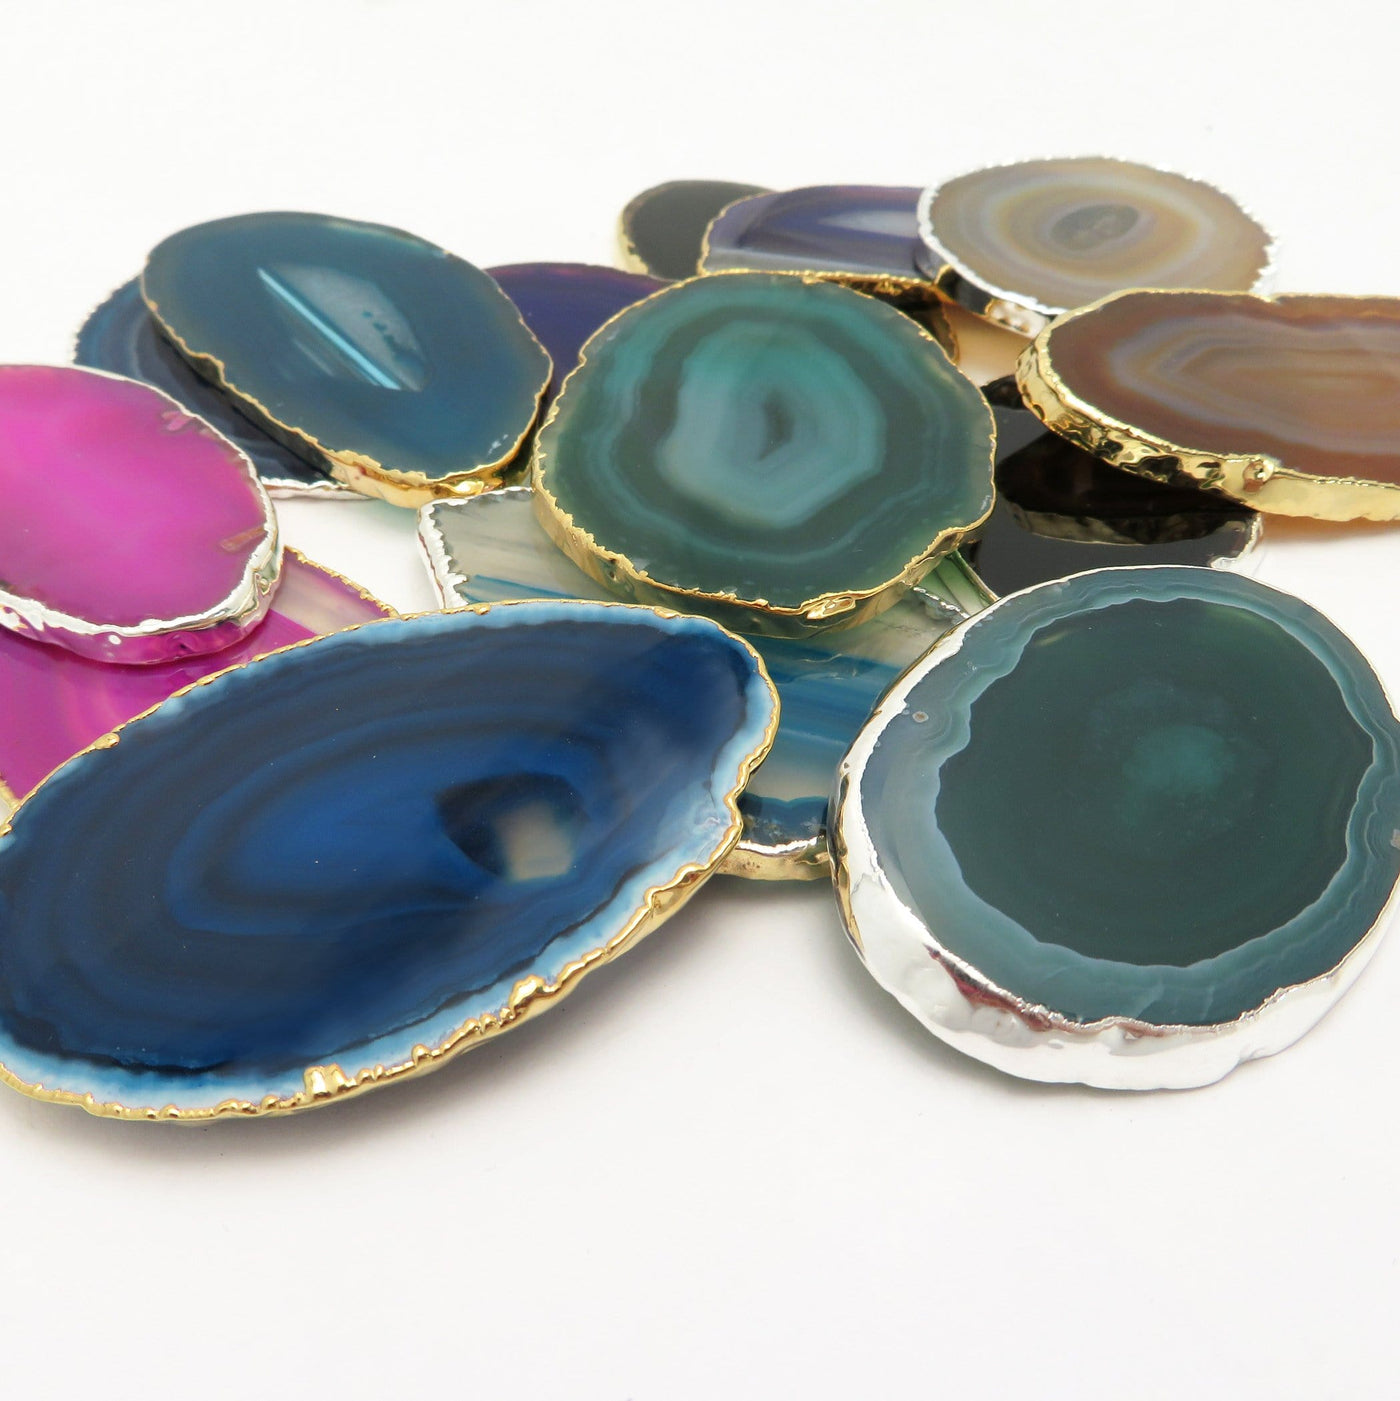 This picture is showing all the variety of colors we have available for our agate slices plated edge, on a white background.